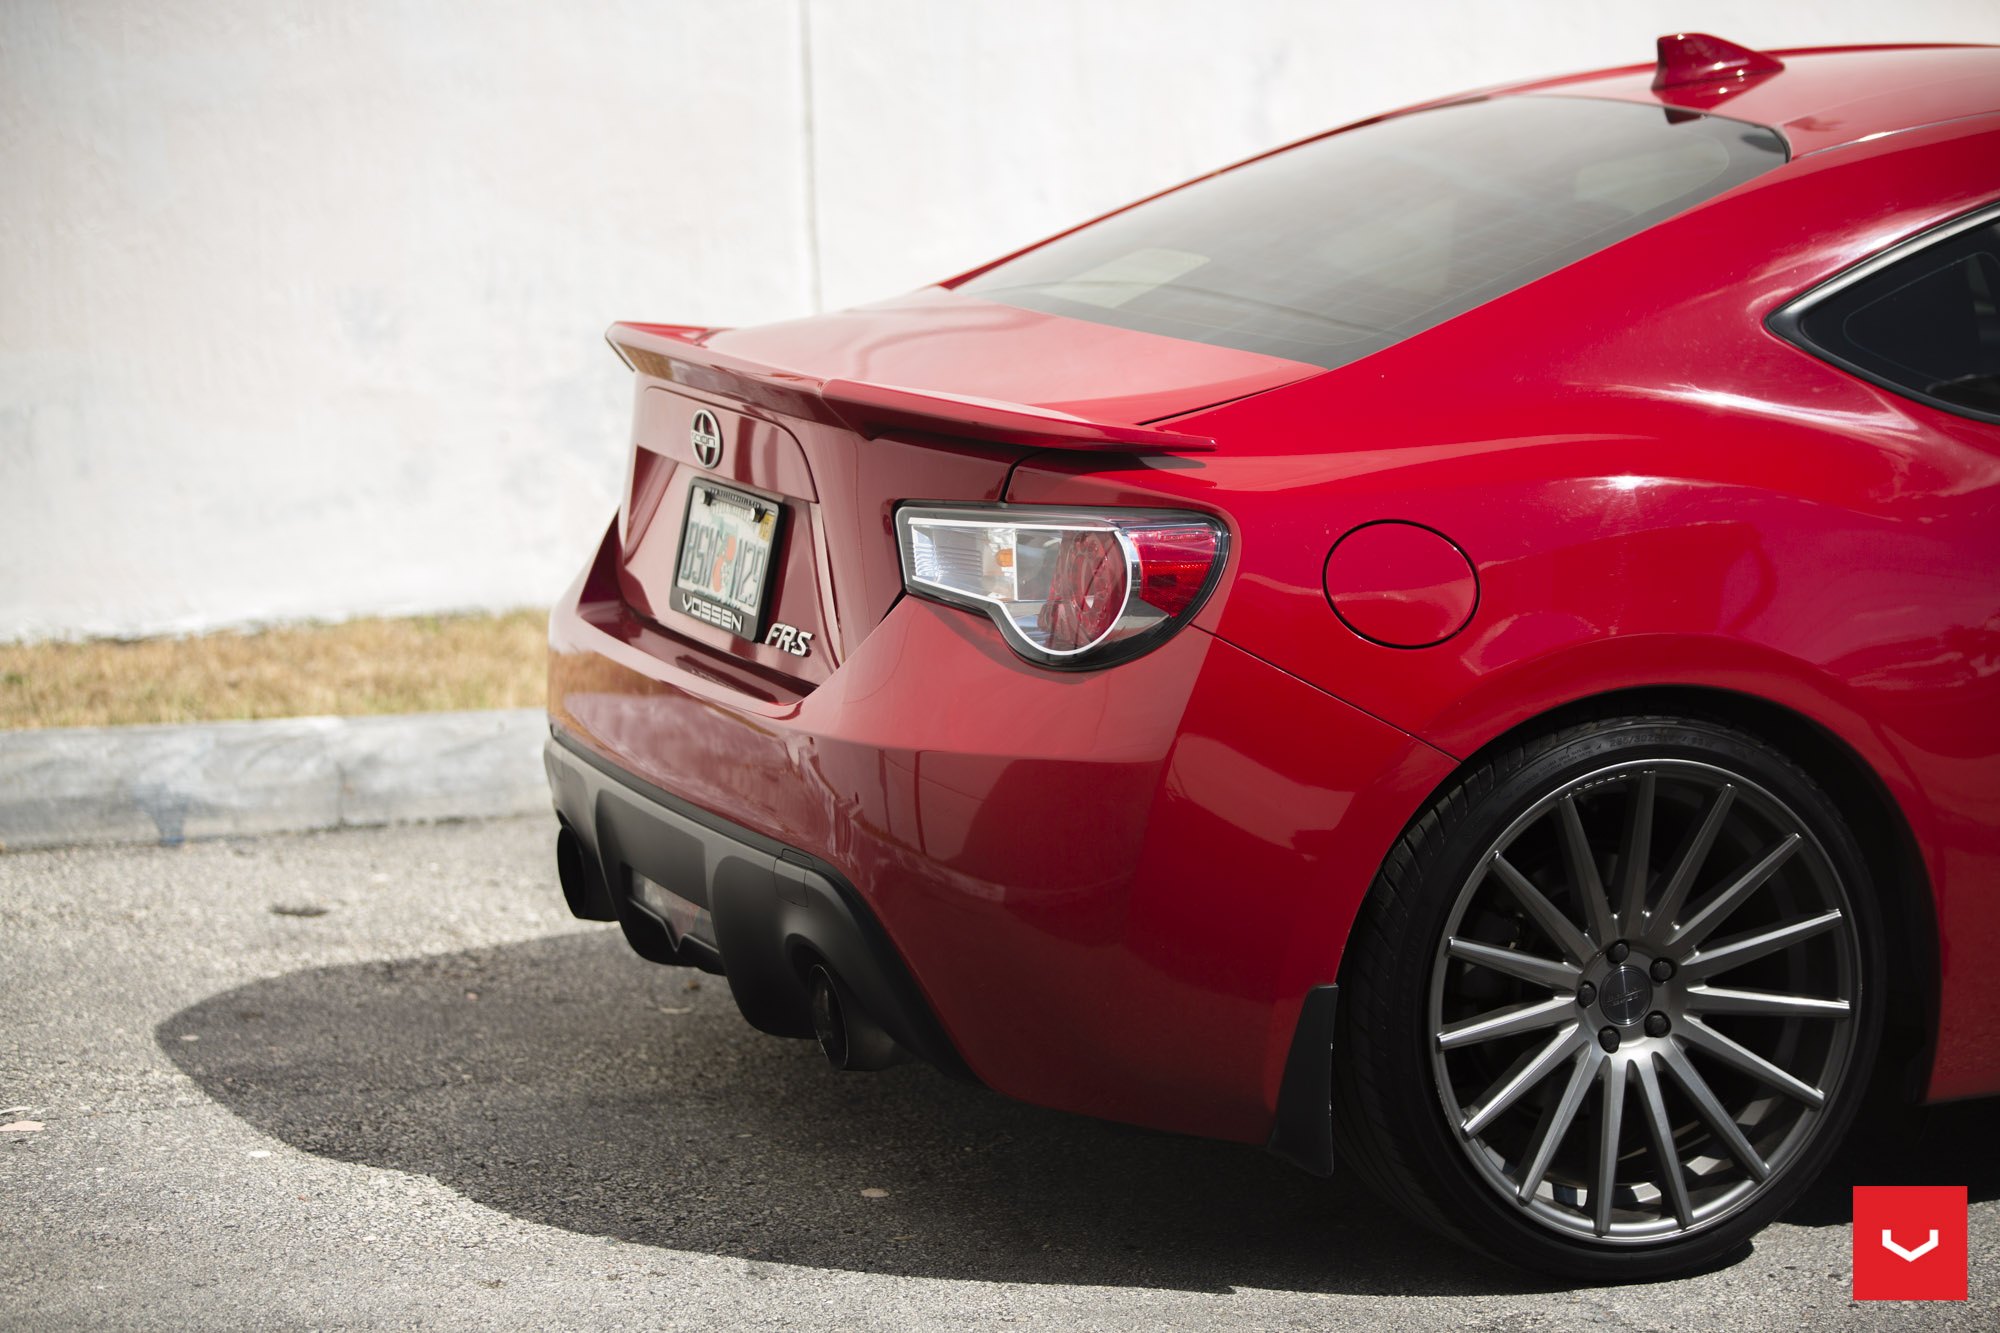 Red Scion FRS with Custom Chrome Vossen Rims - Photo by Vossen